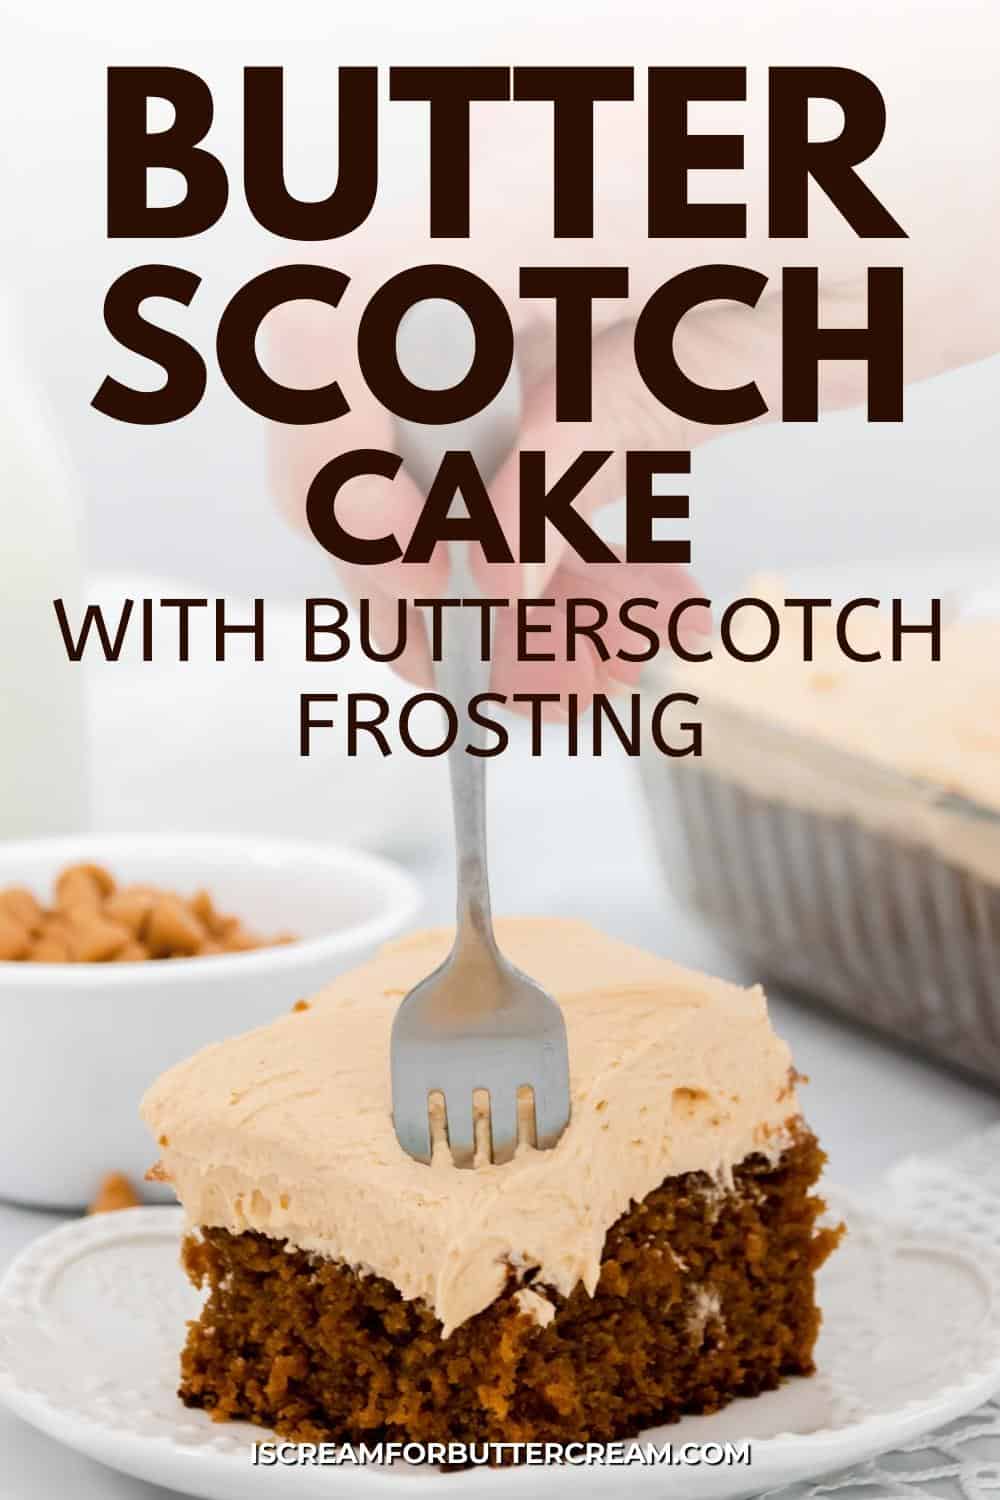 Butterscotch cake slice with fork and text overlay.